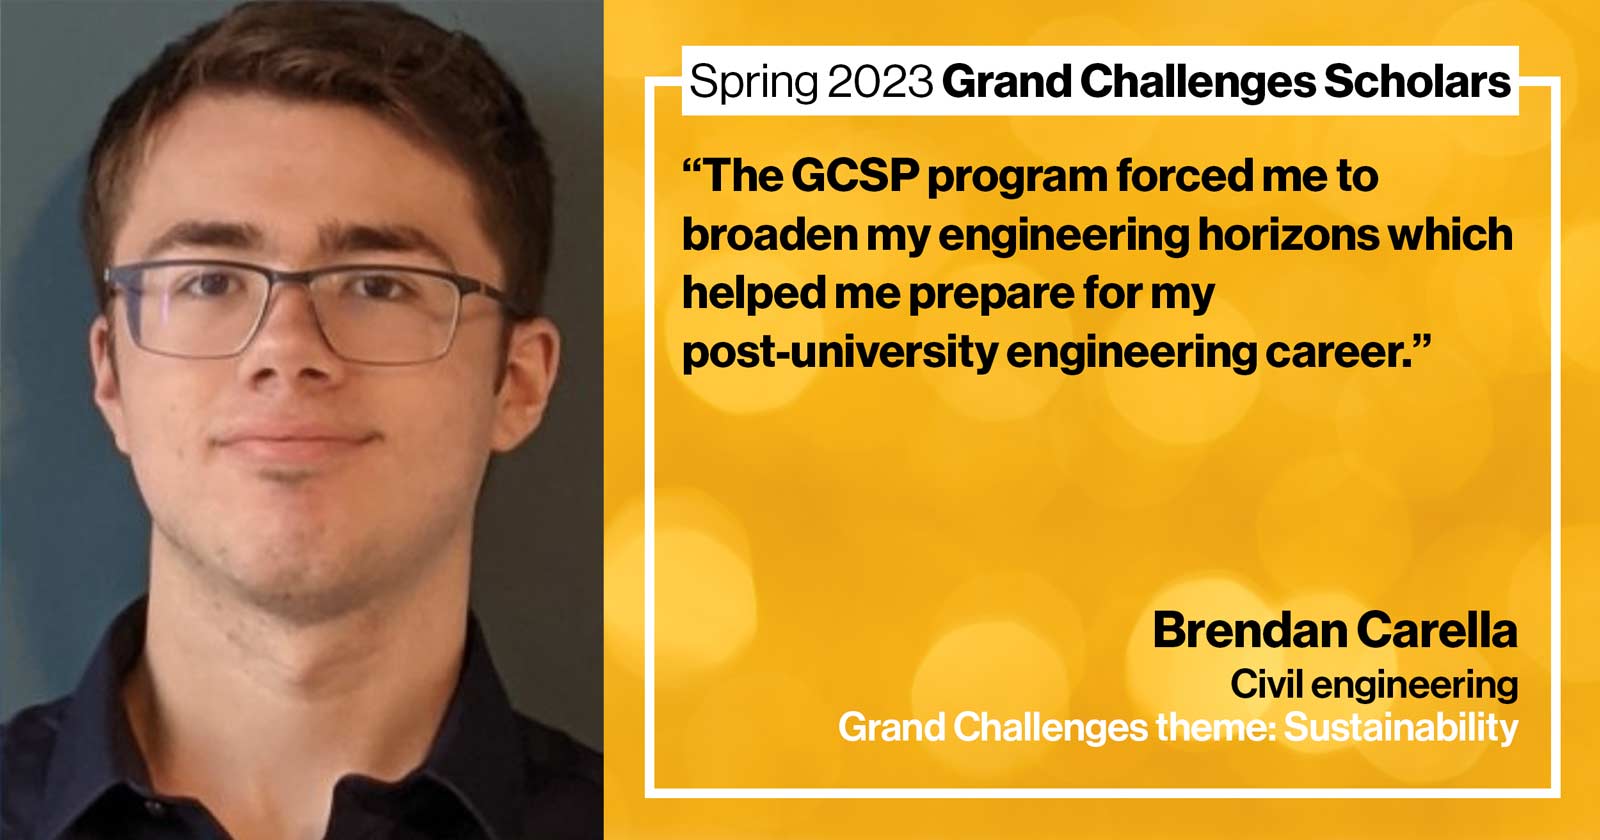 "Brendan Carella Civil engineering Grand Challenge: Sustainability Quote: “The GCSP program forced me to broaden my engineering horizons which helped me prepare for my post-university engineering career.”"